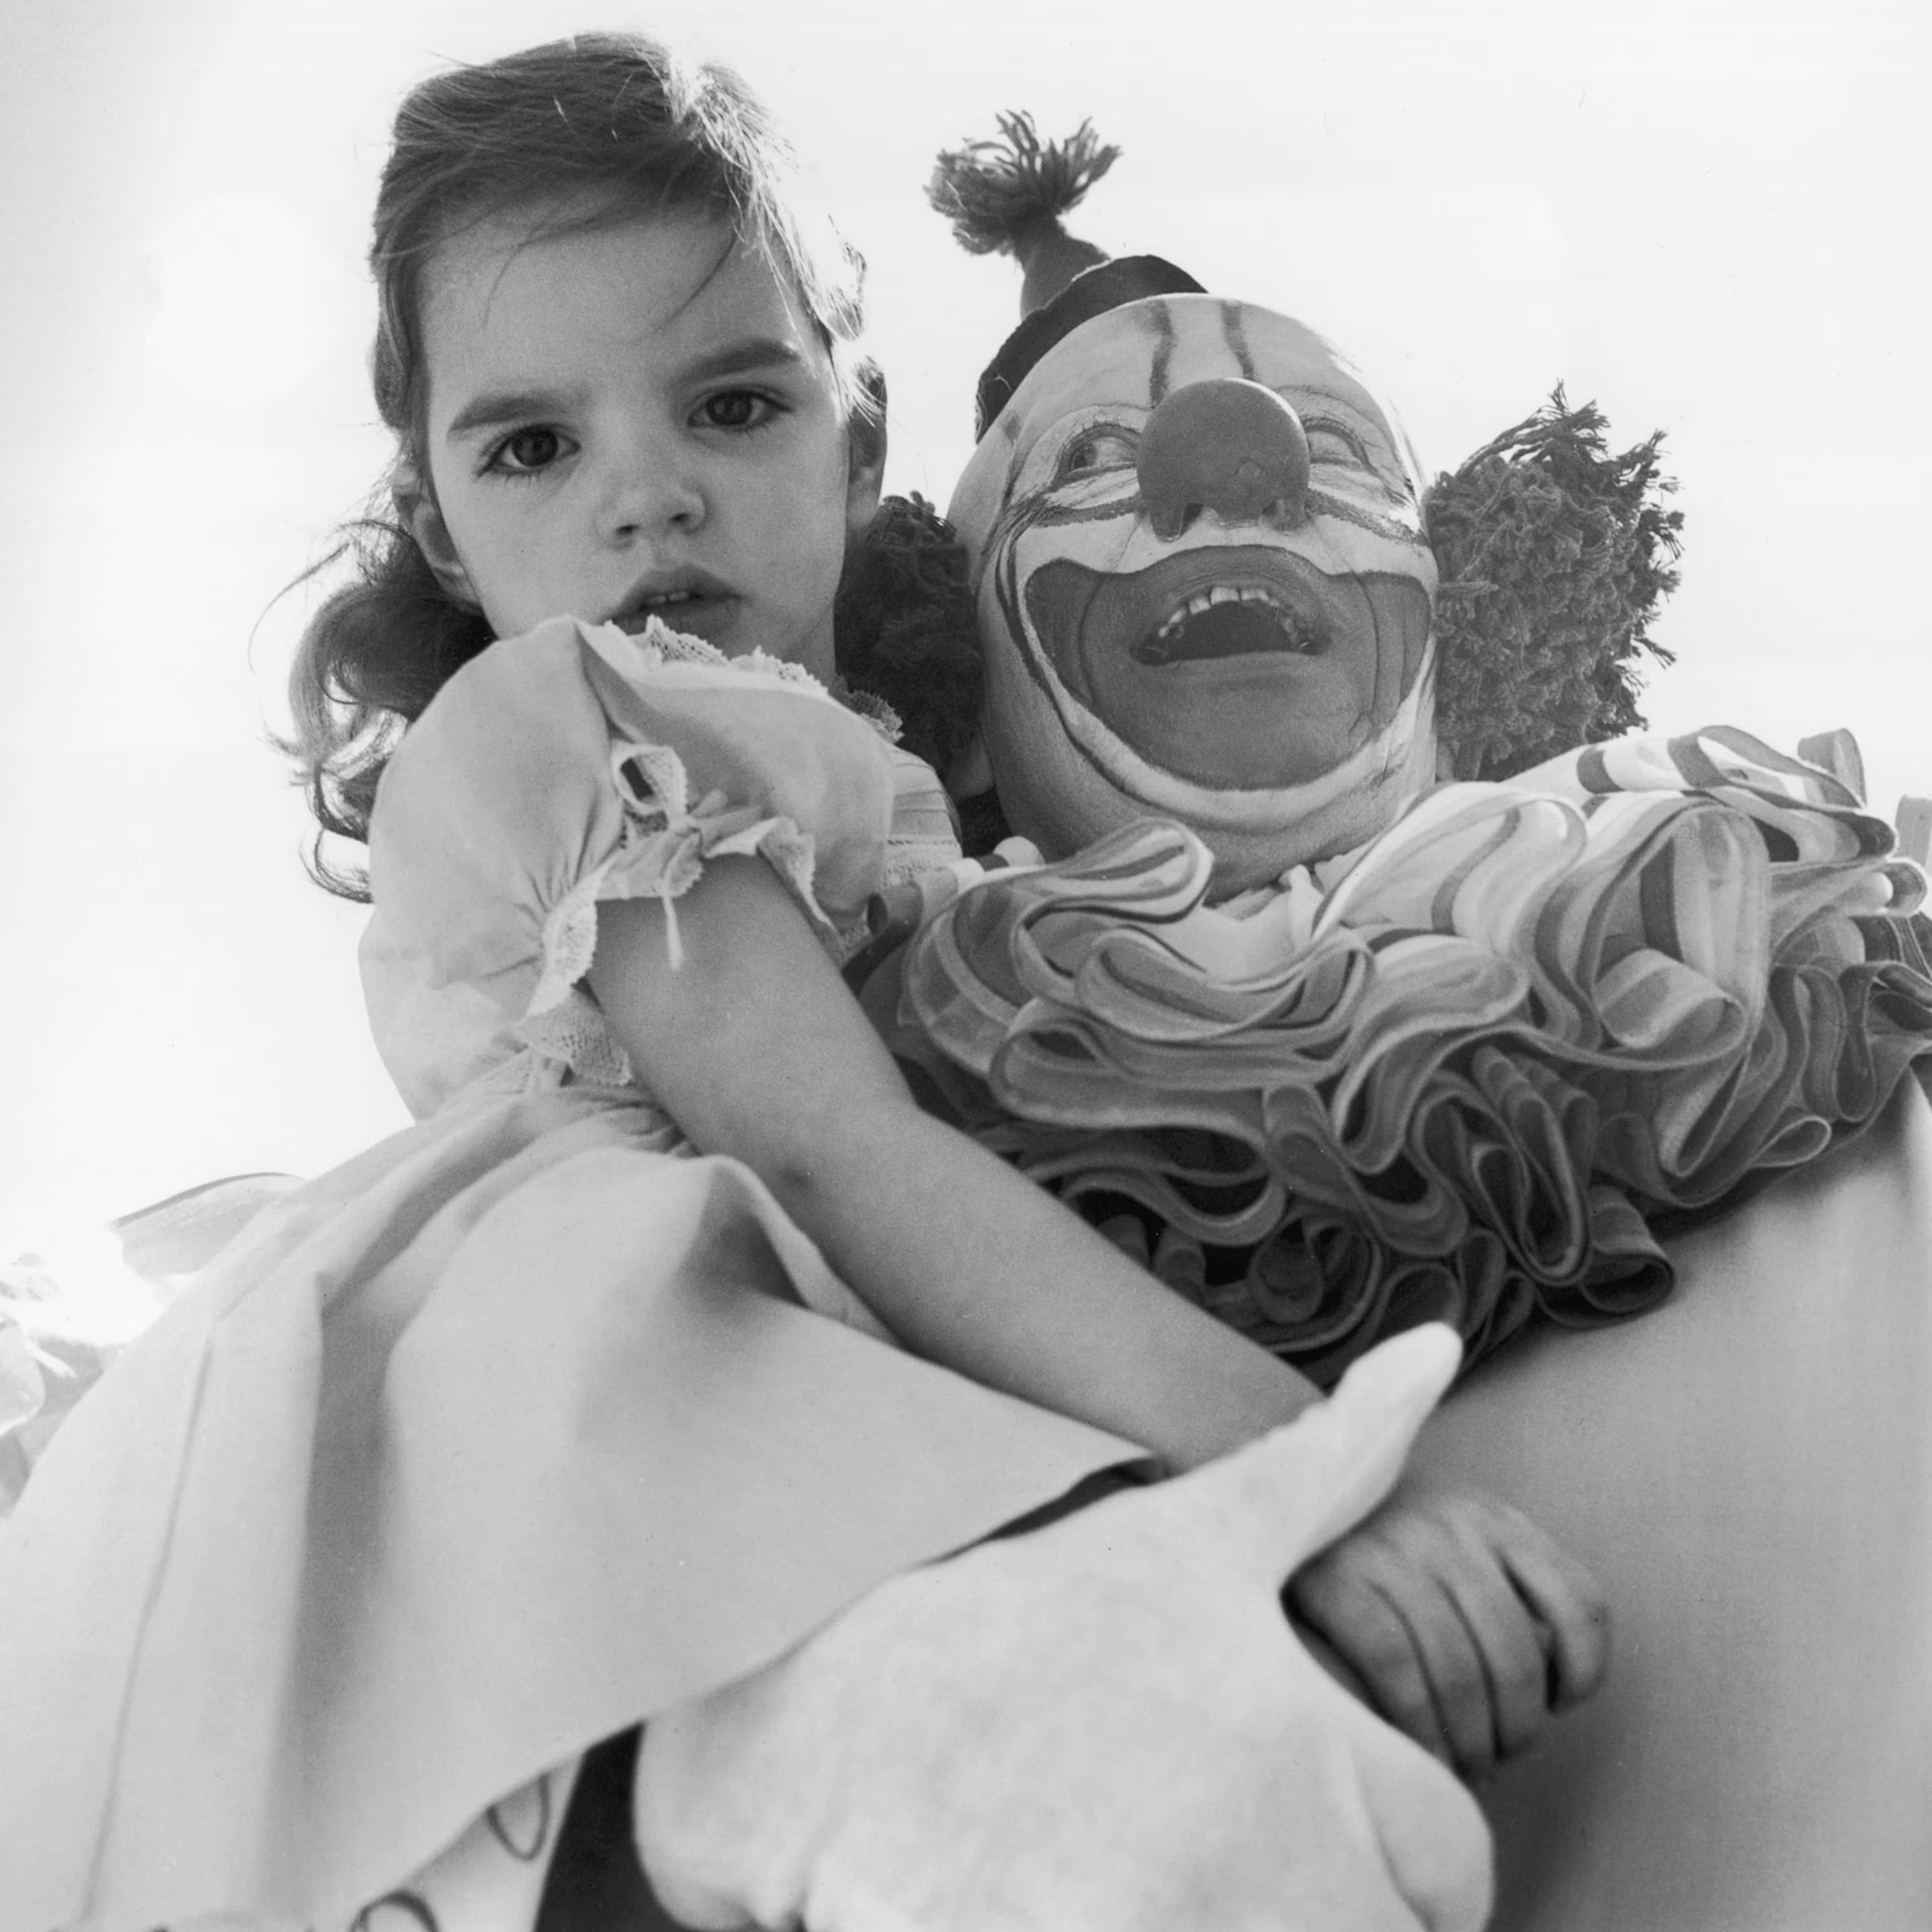 A Young Girl Is Holding A Clown